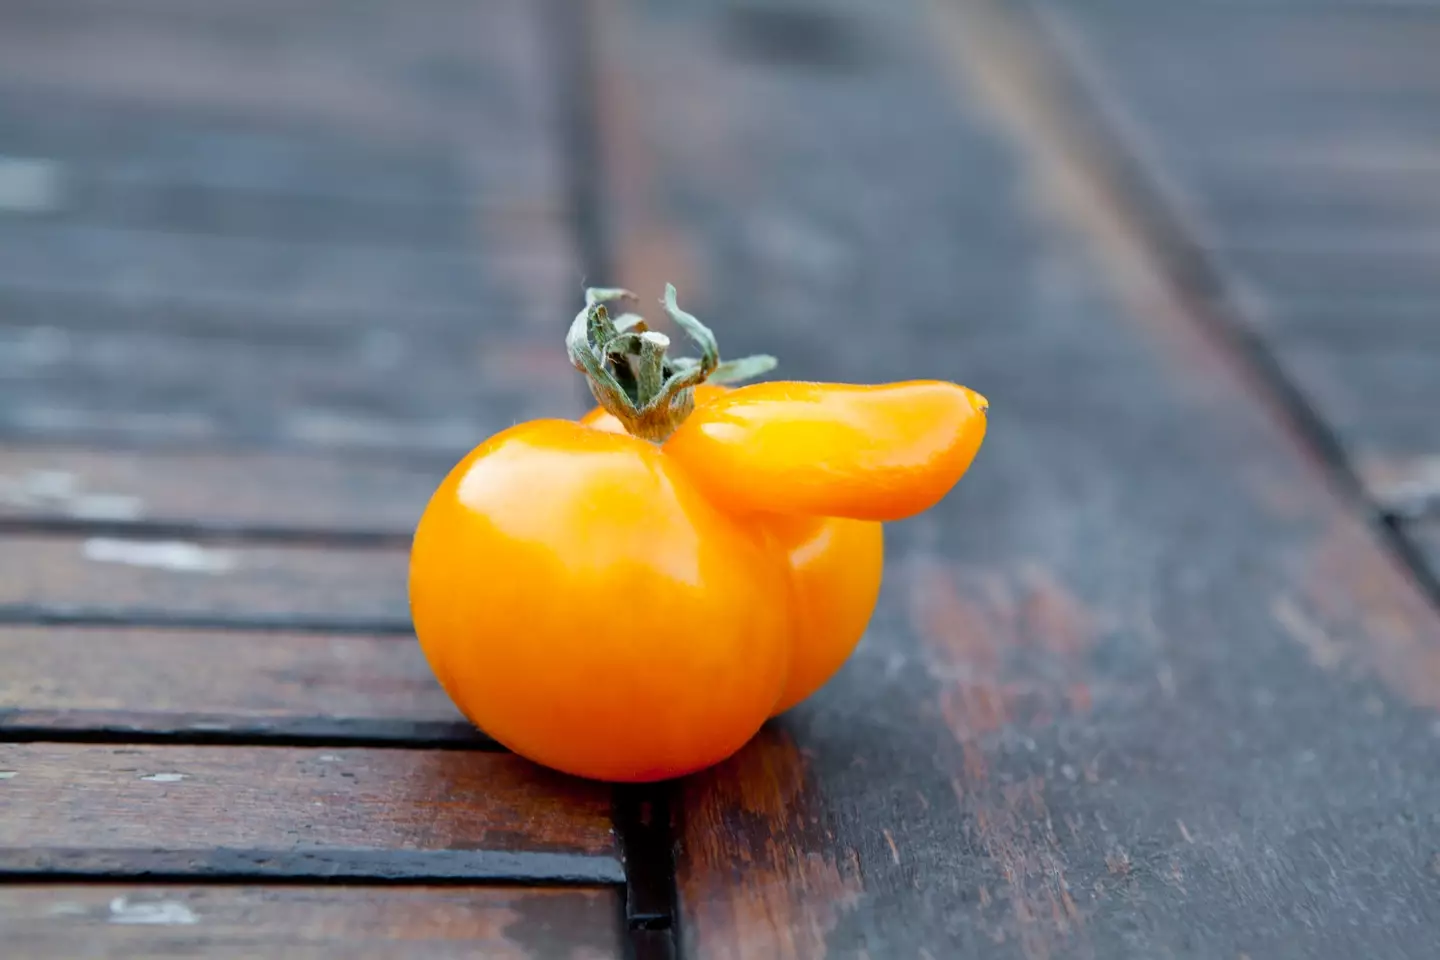 This tomato looks like a doodle.